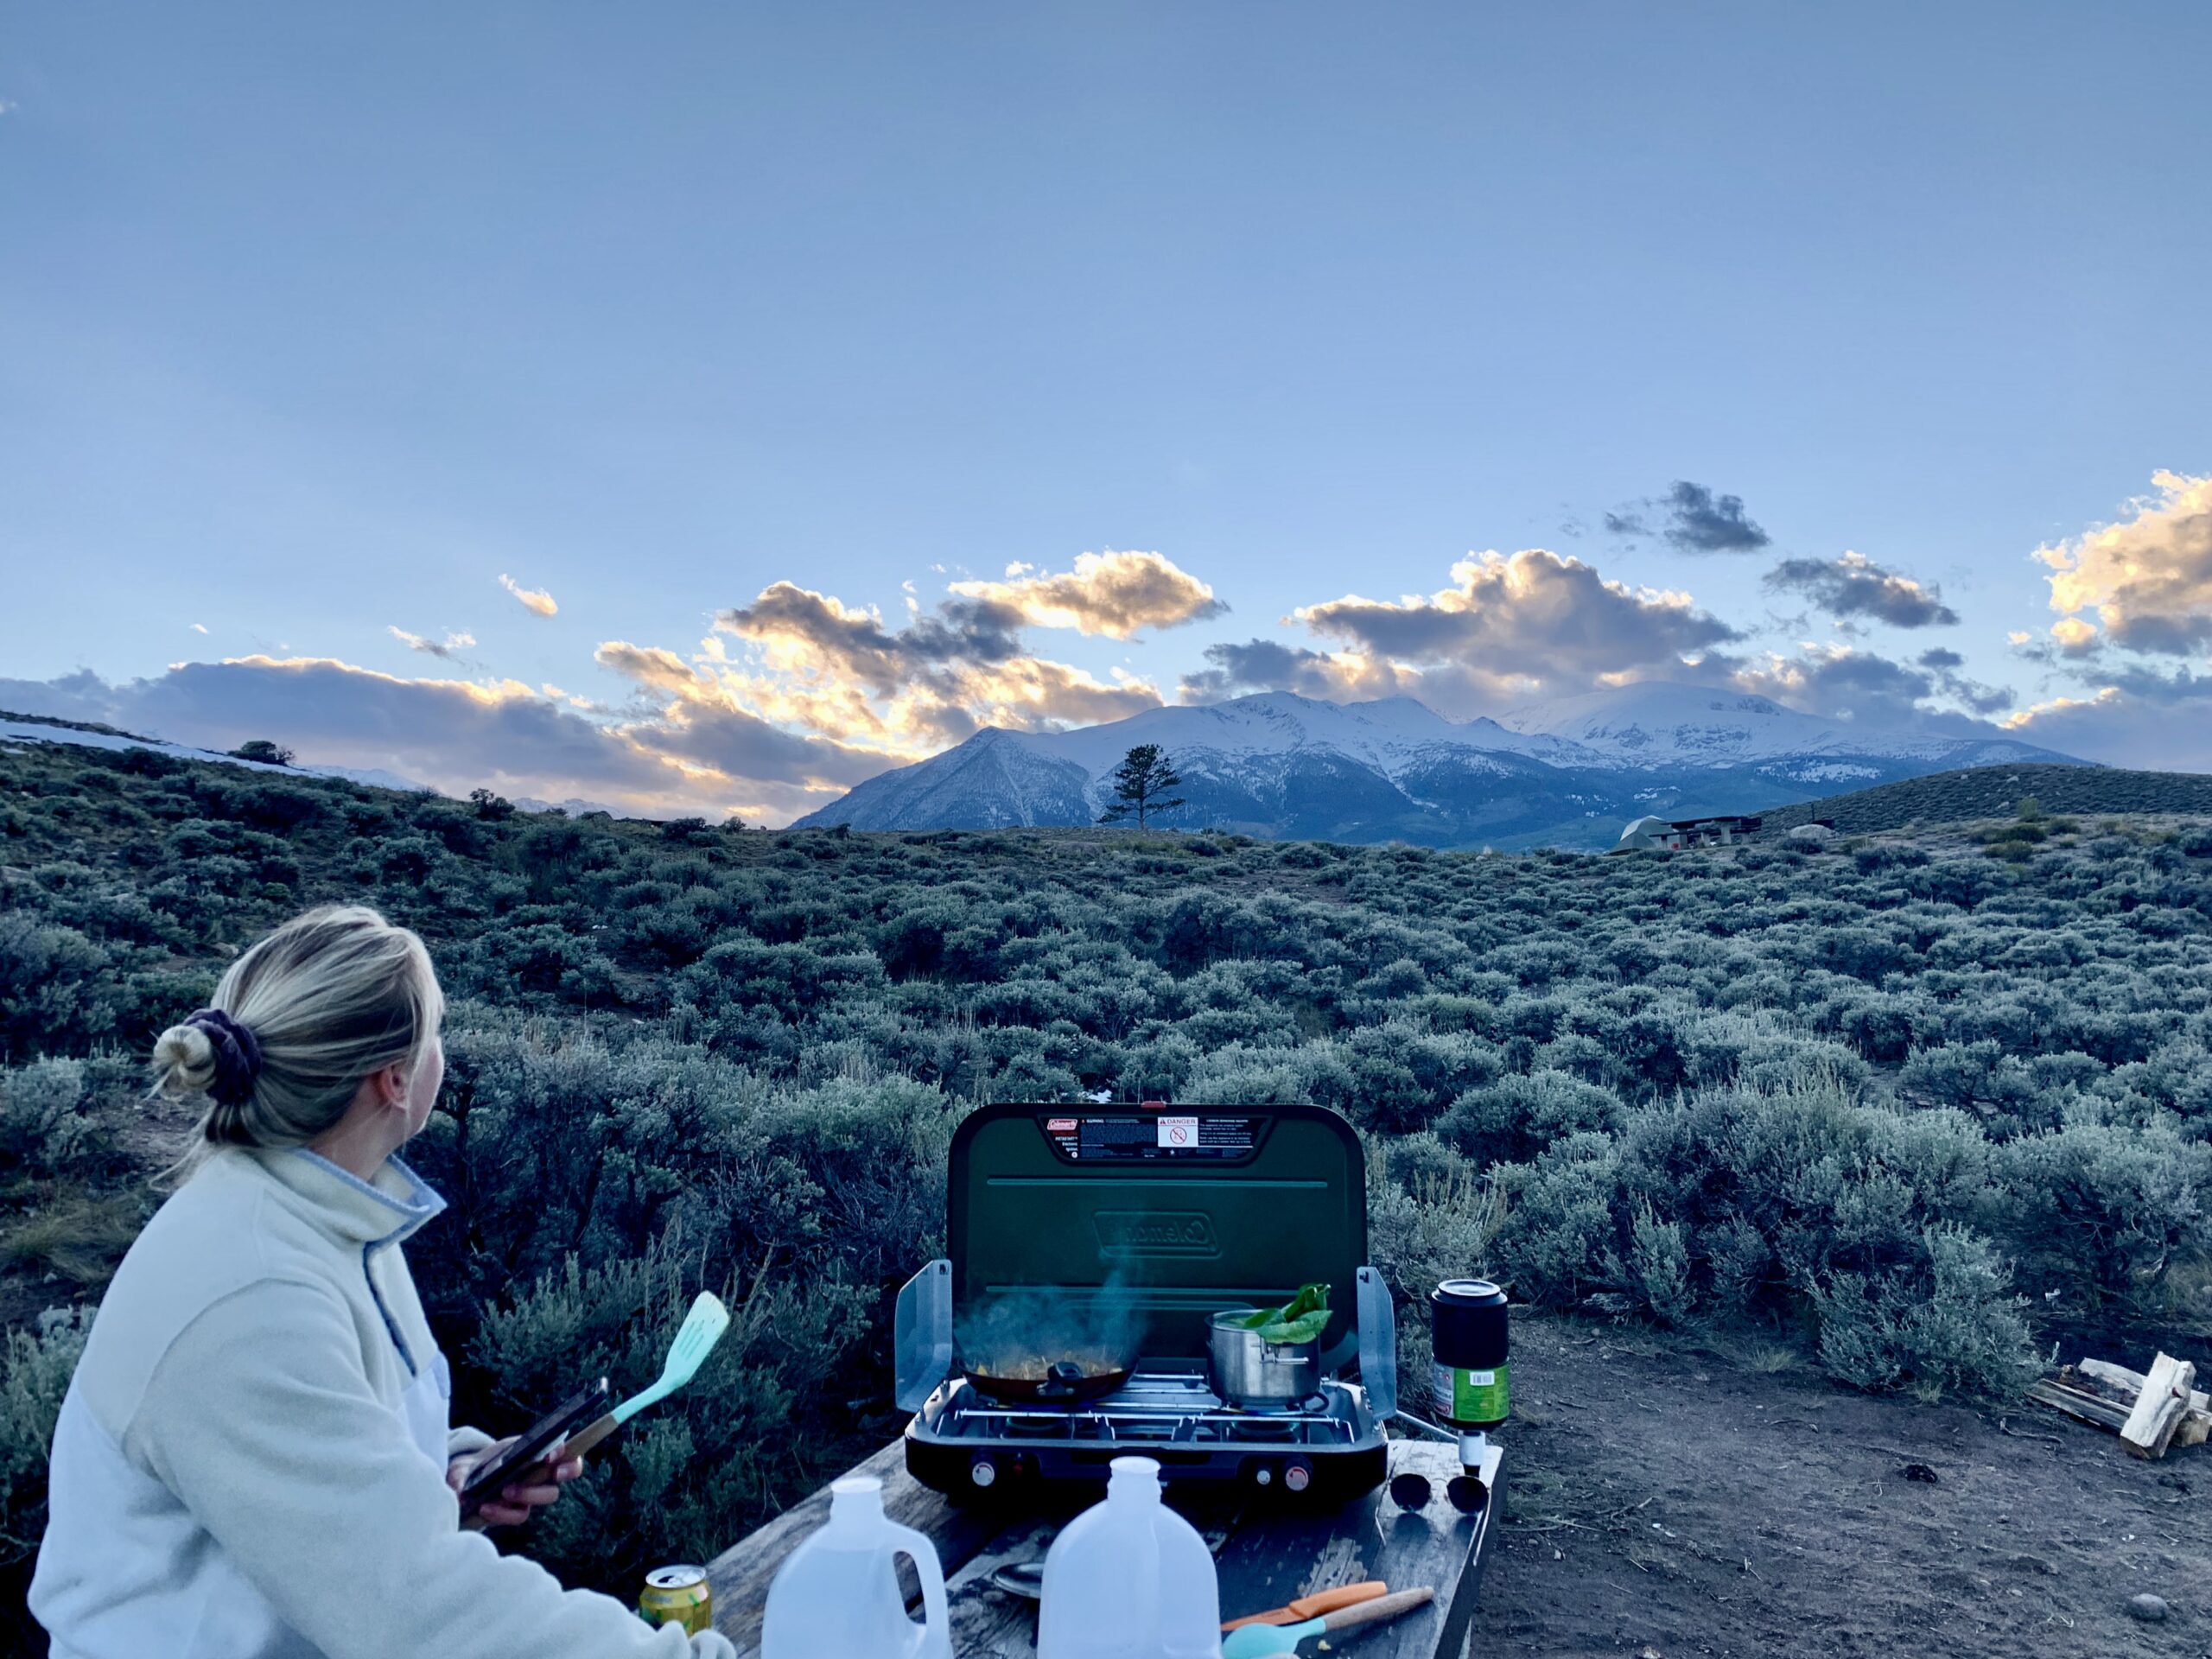 A woman cooking on a camping stove looking over mountains